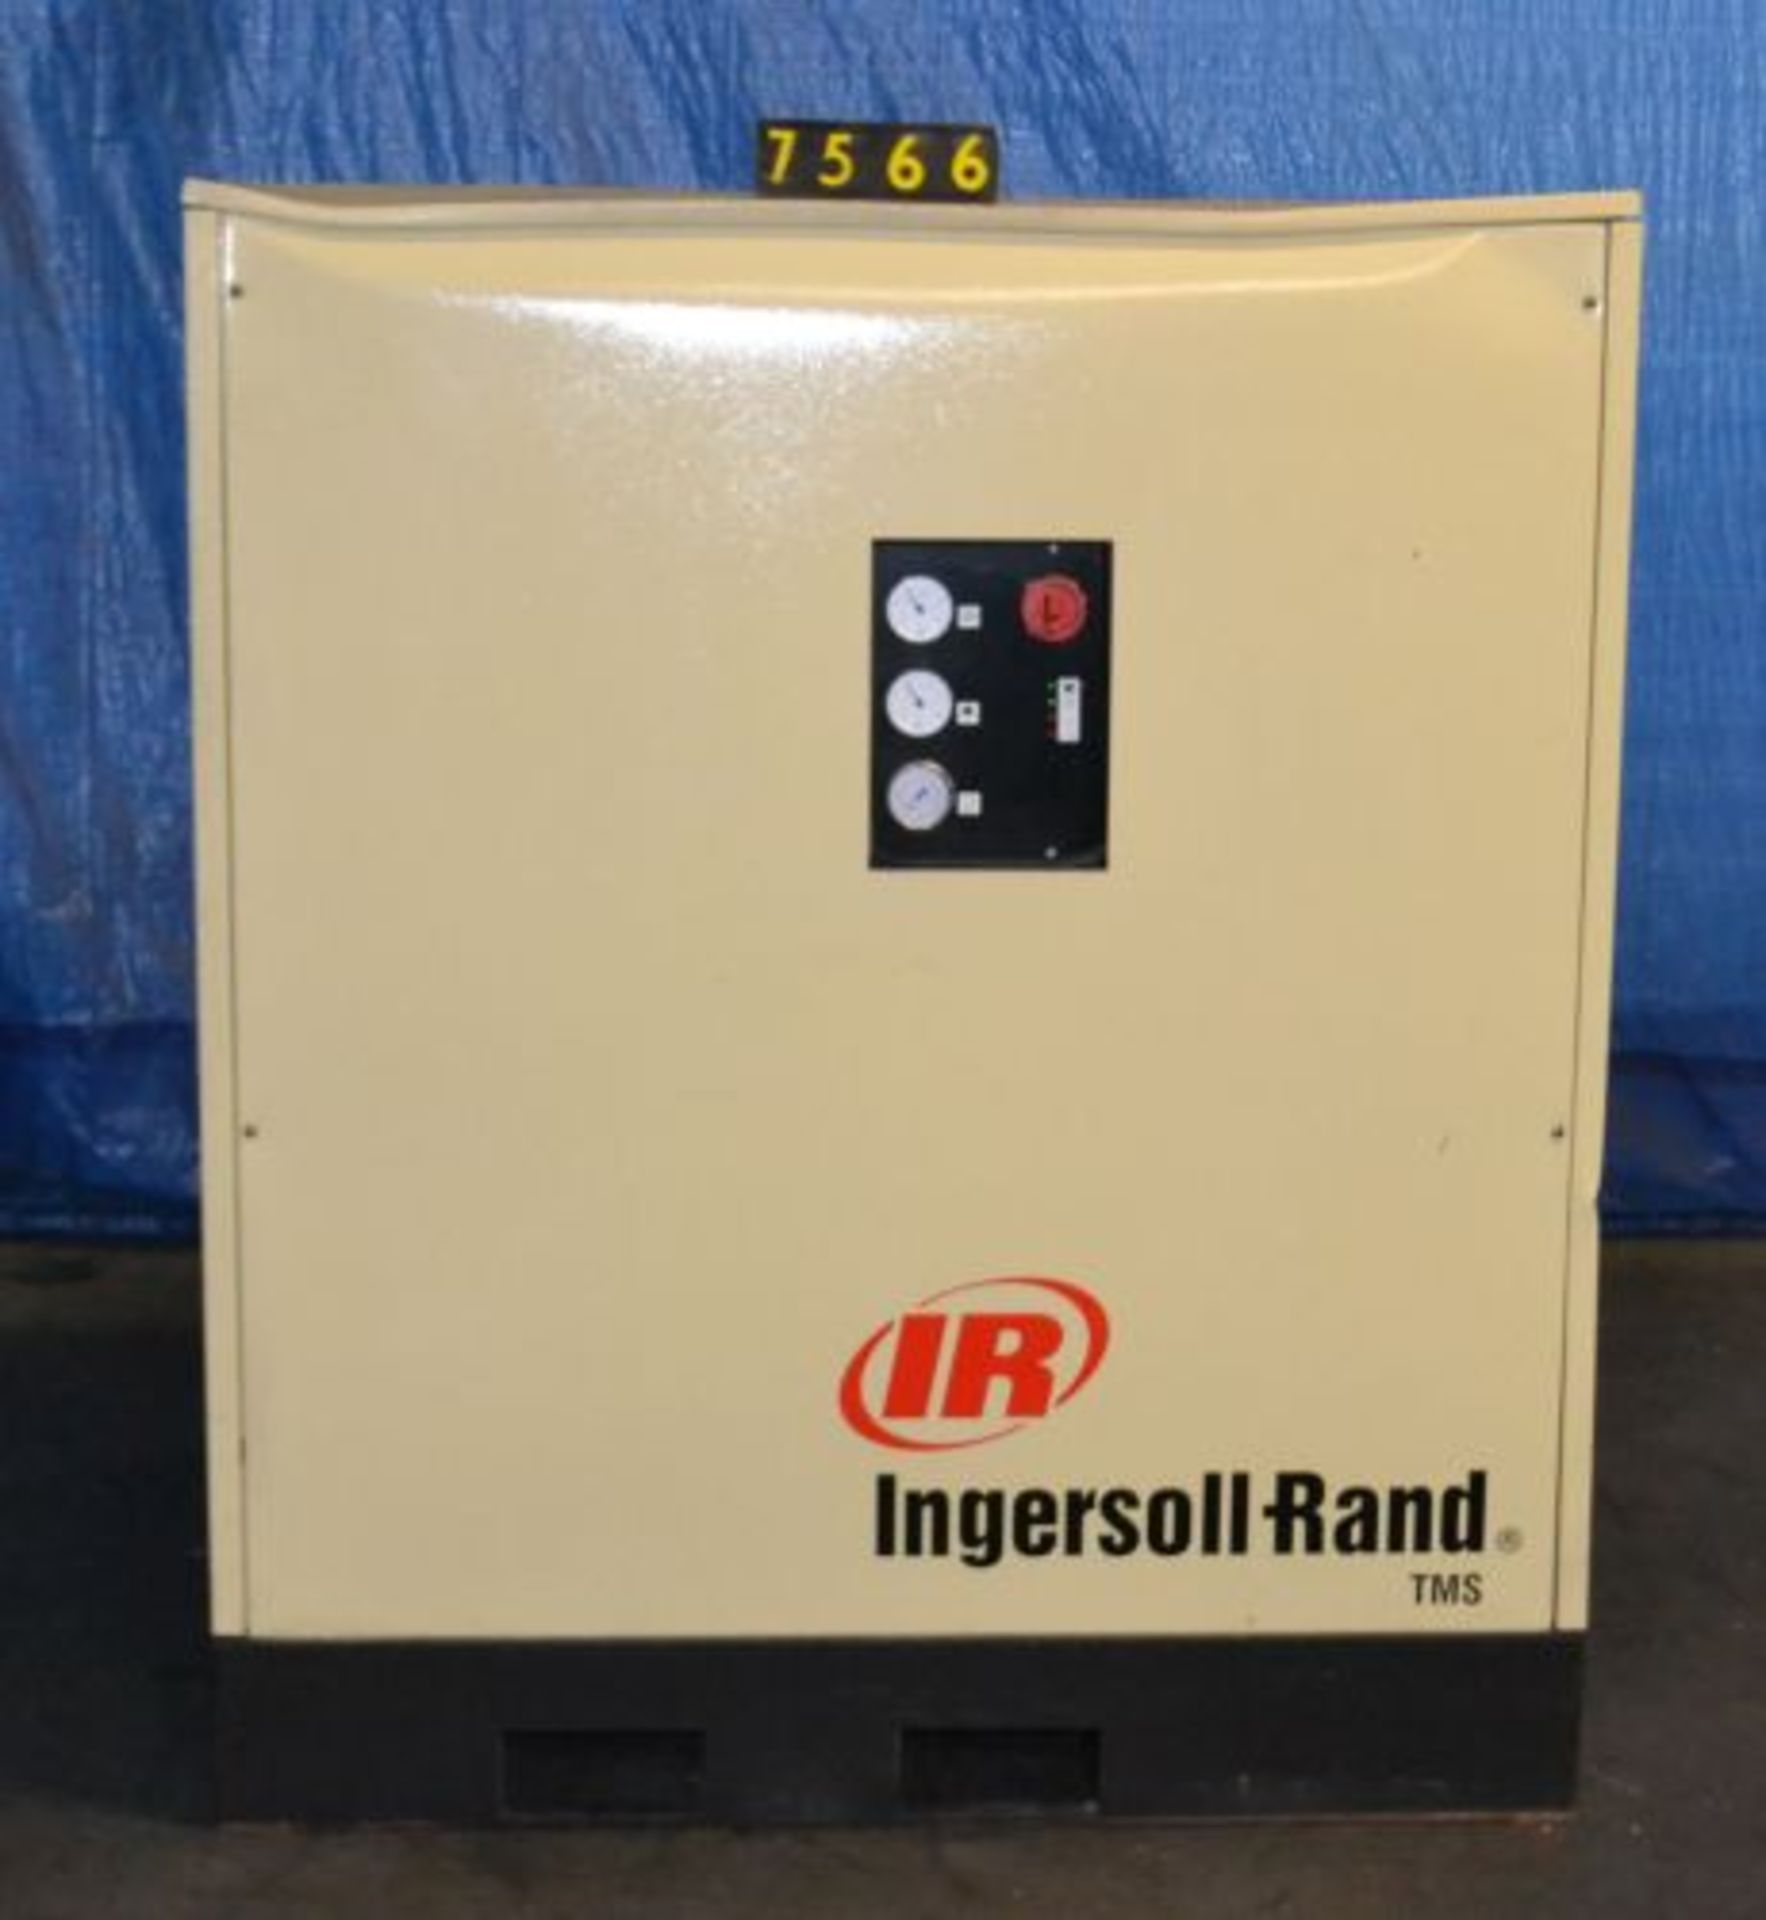 Ingersoll-Rand model number TMS0380 air dryer